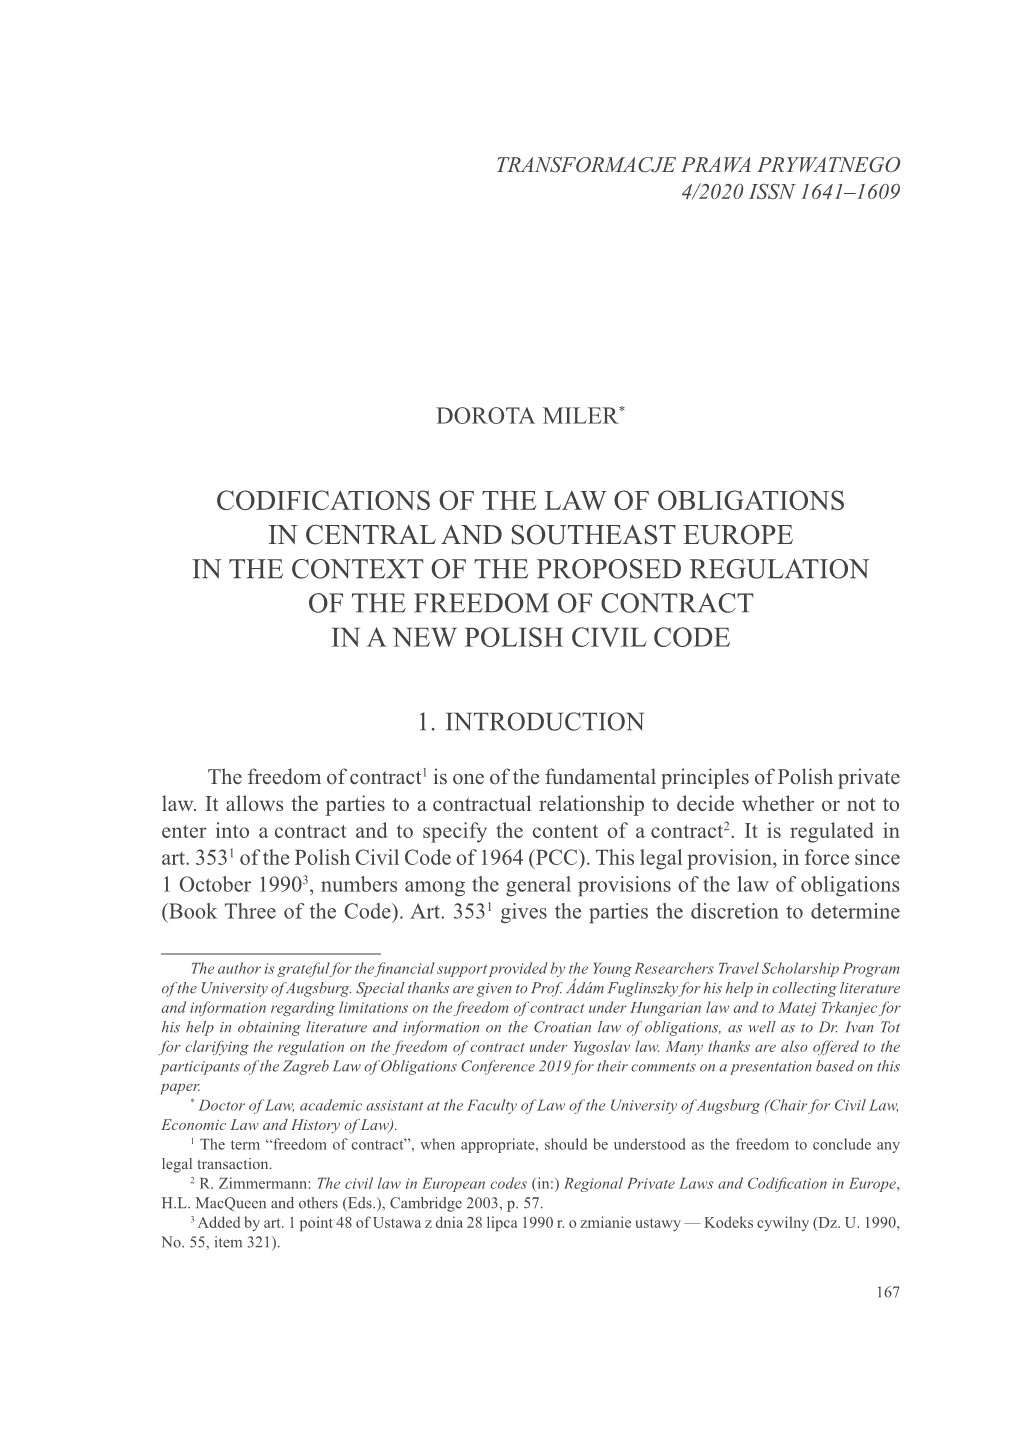 Codifications of the Law of Obligations in Central and Southeast Europe In